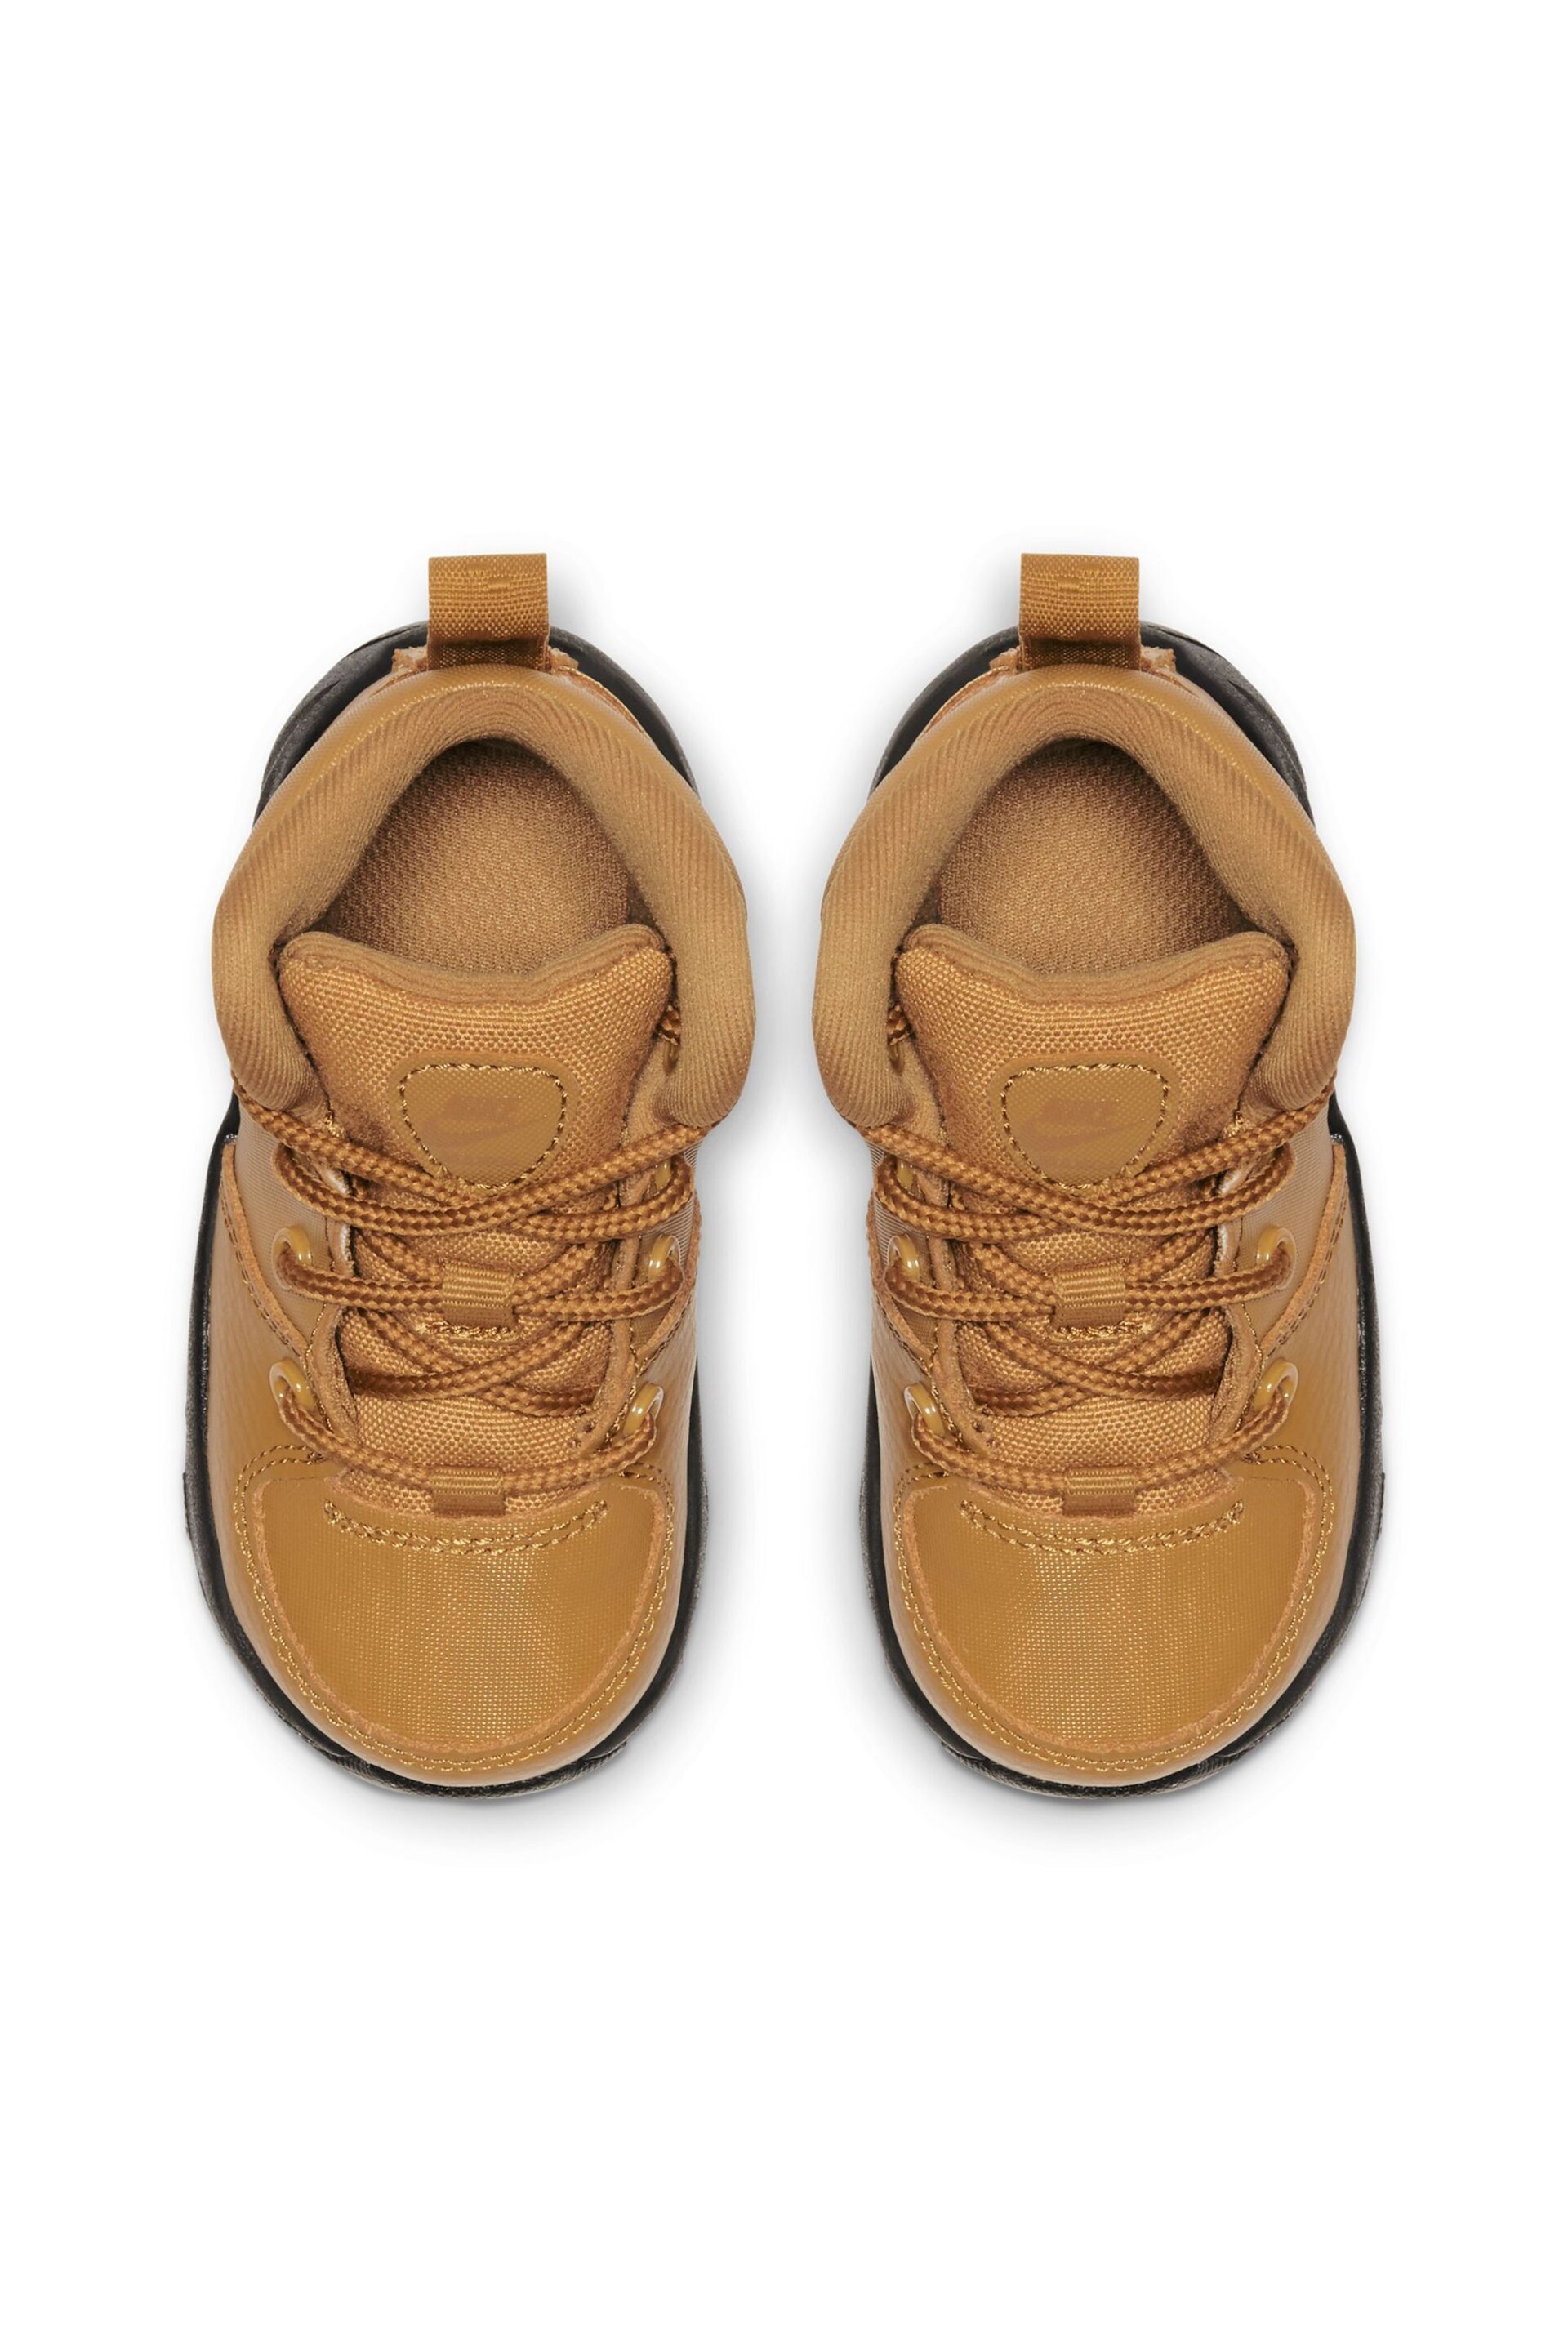 Nike Brown Manoa Infant Boots - Image 3 of 6